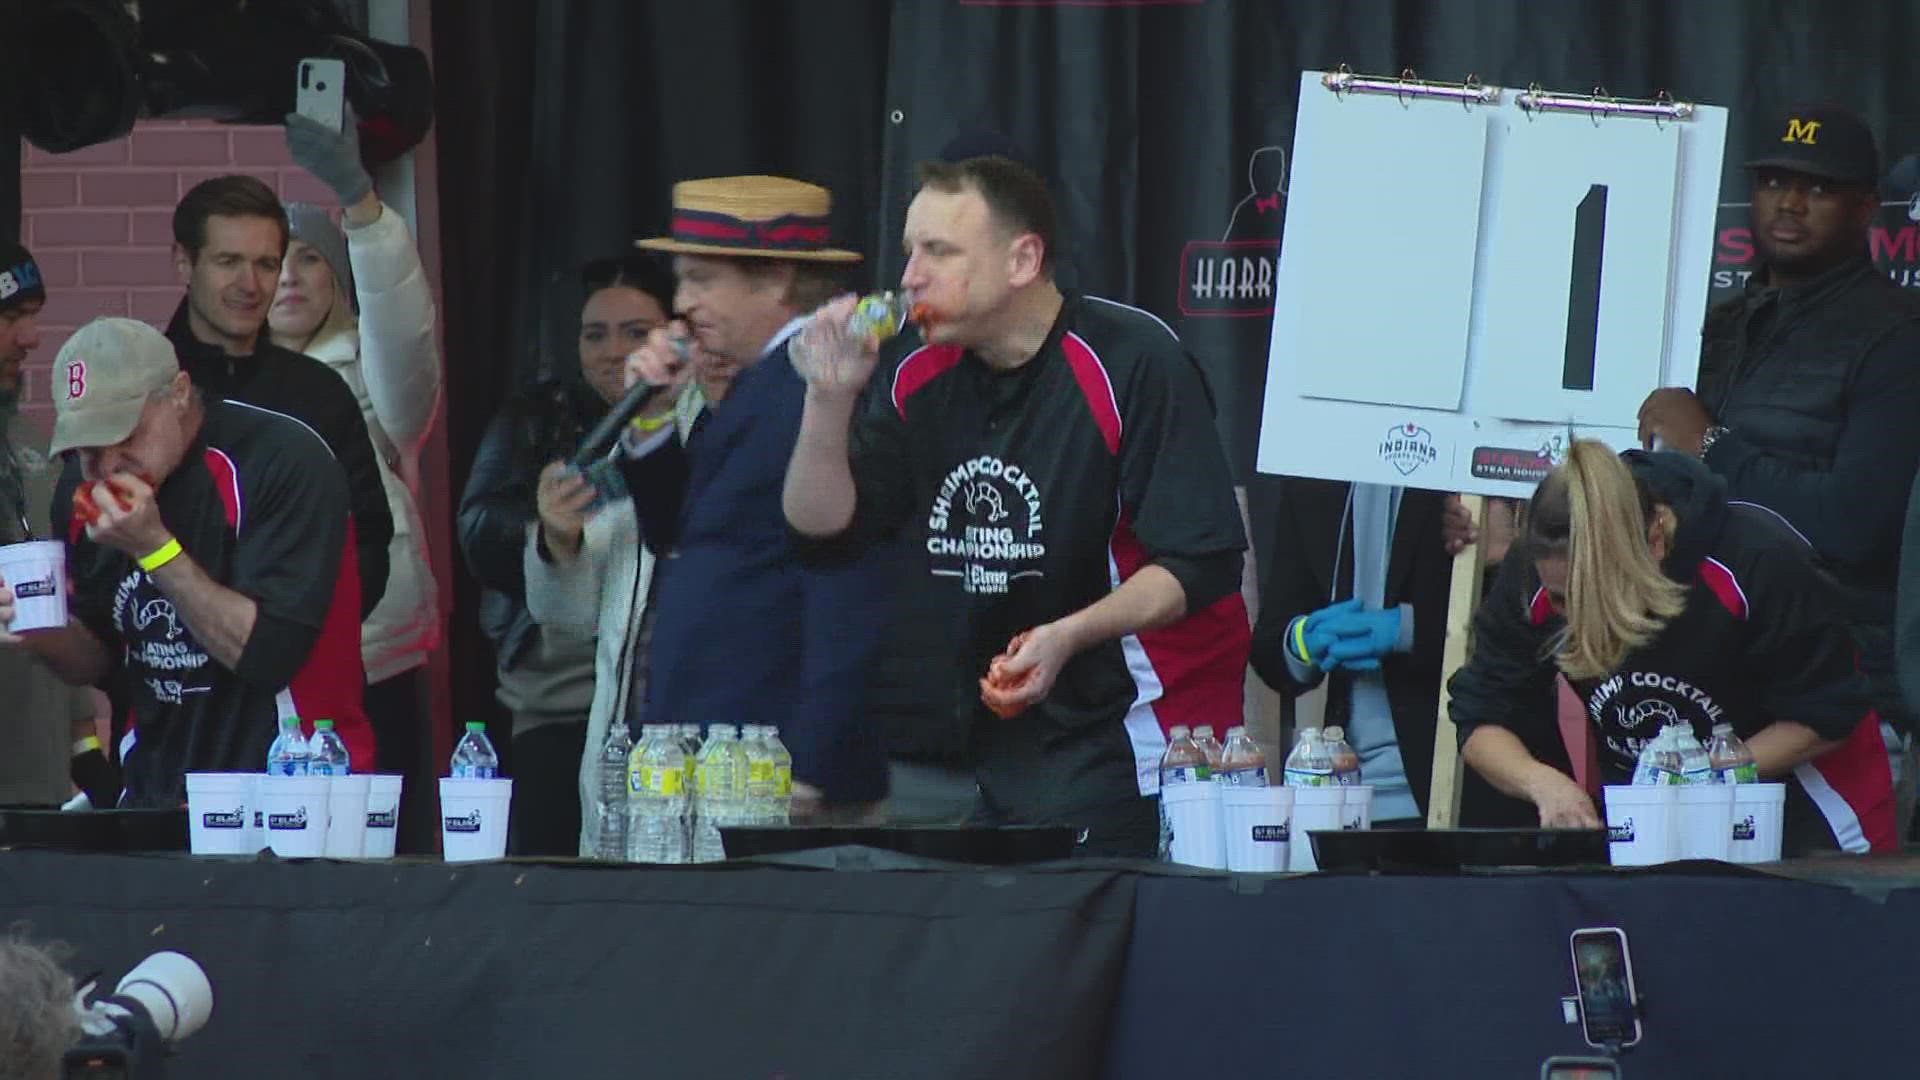 Joey Chestnut hoped to stay undefeated in the ninth year of this event but was upset by Geoff Esper.